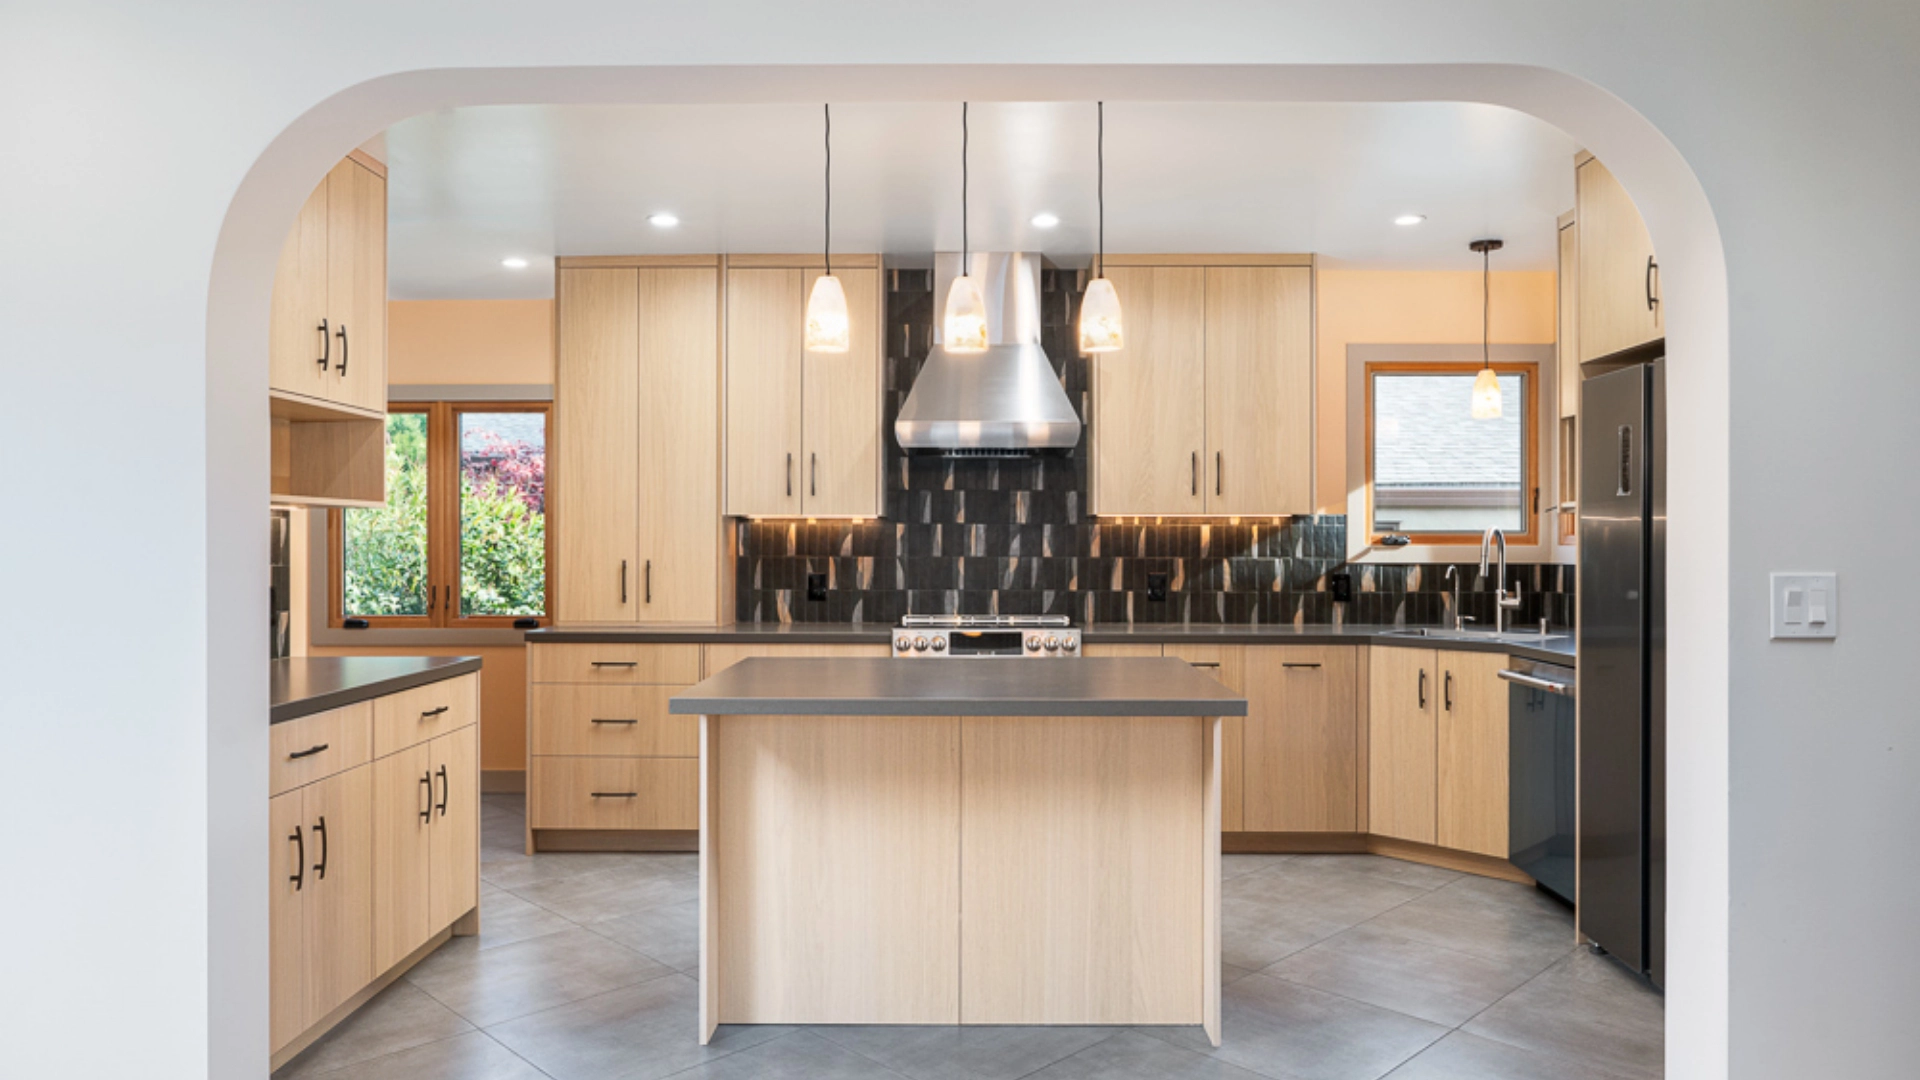 Modern kitchen with light wooden cabinets, dark countertops, a large island, stainless steel appliances, pendant lights, and a black tile backsplash.